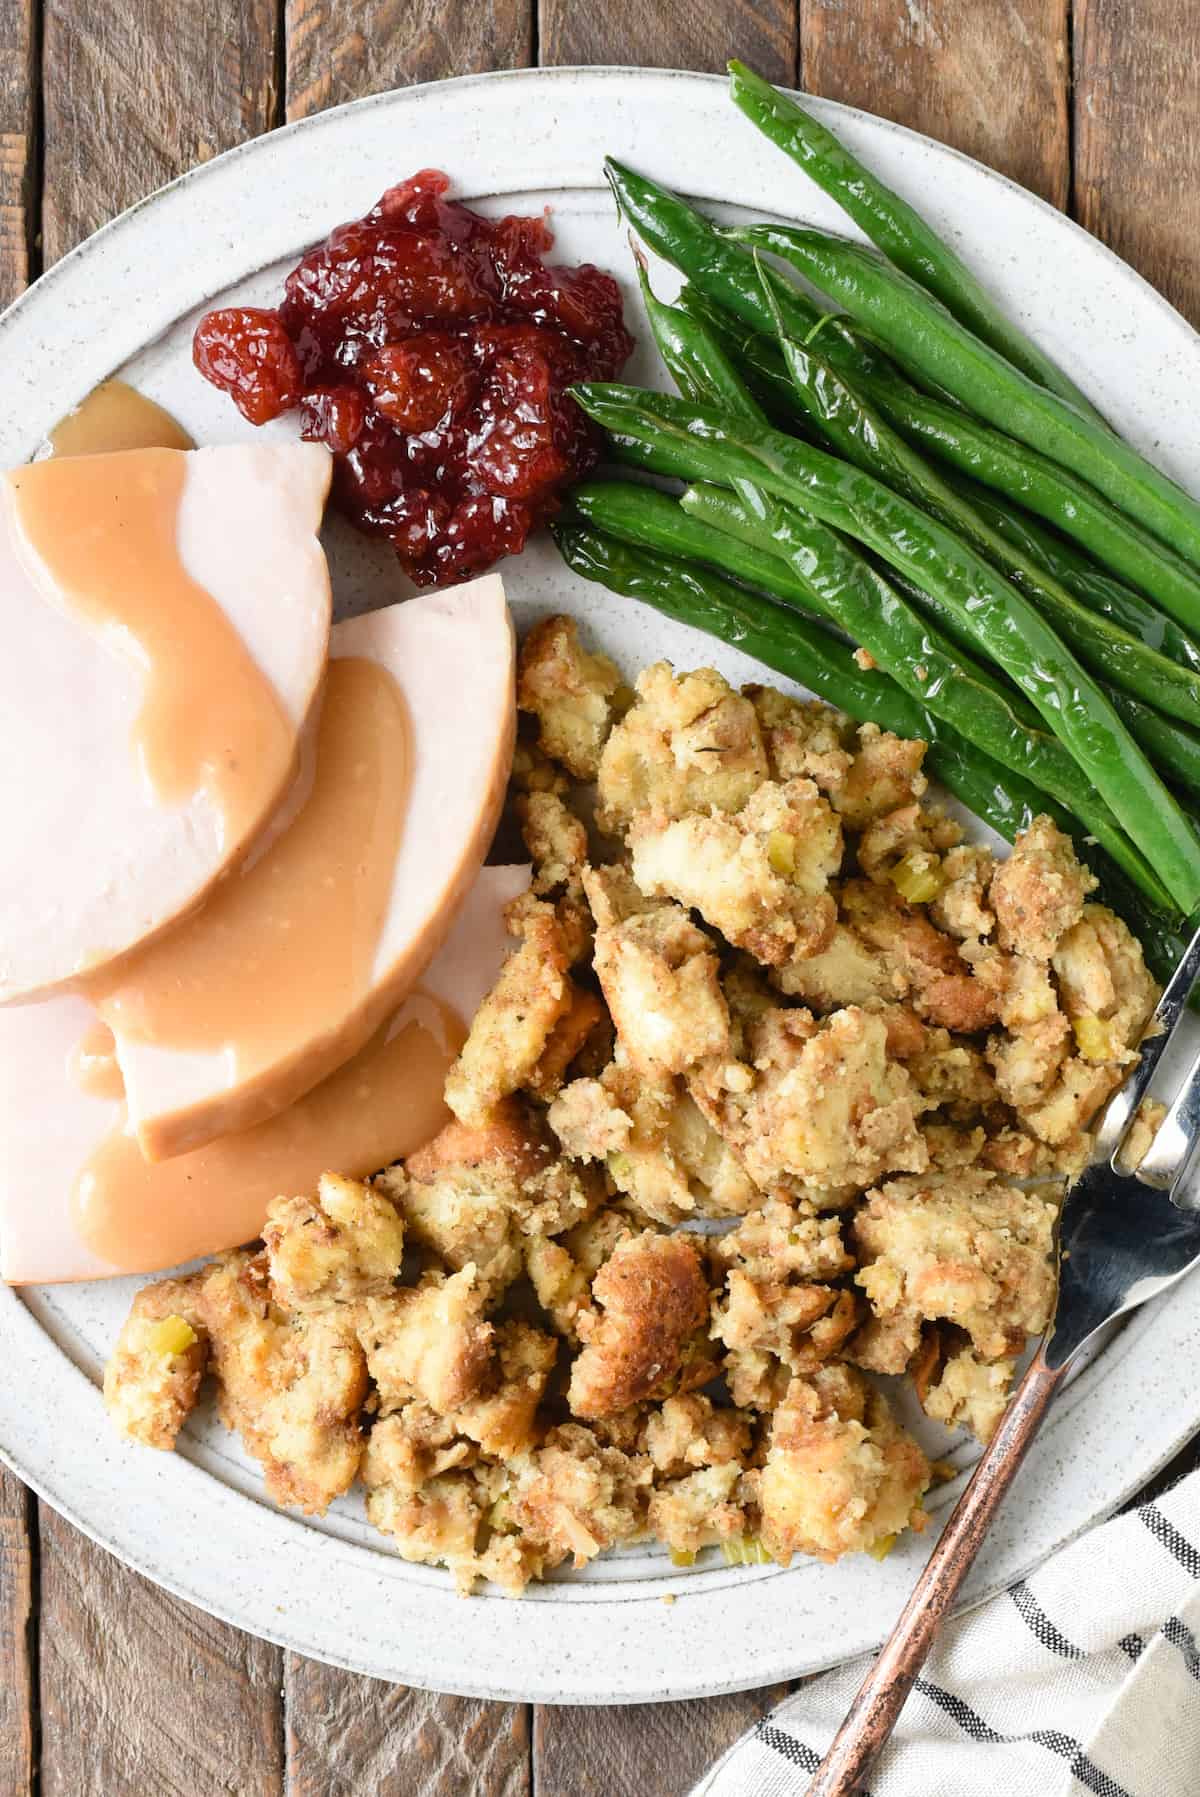 Plate of Thanksgiving dinner, with turkey and gravy, bread stuffing, cranberry sauce and green beans.